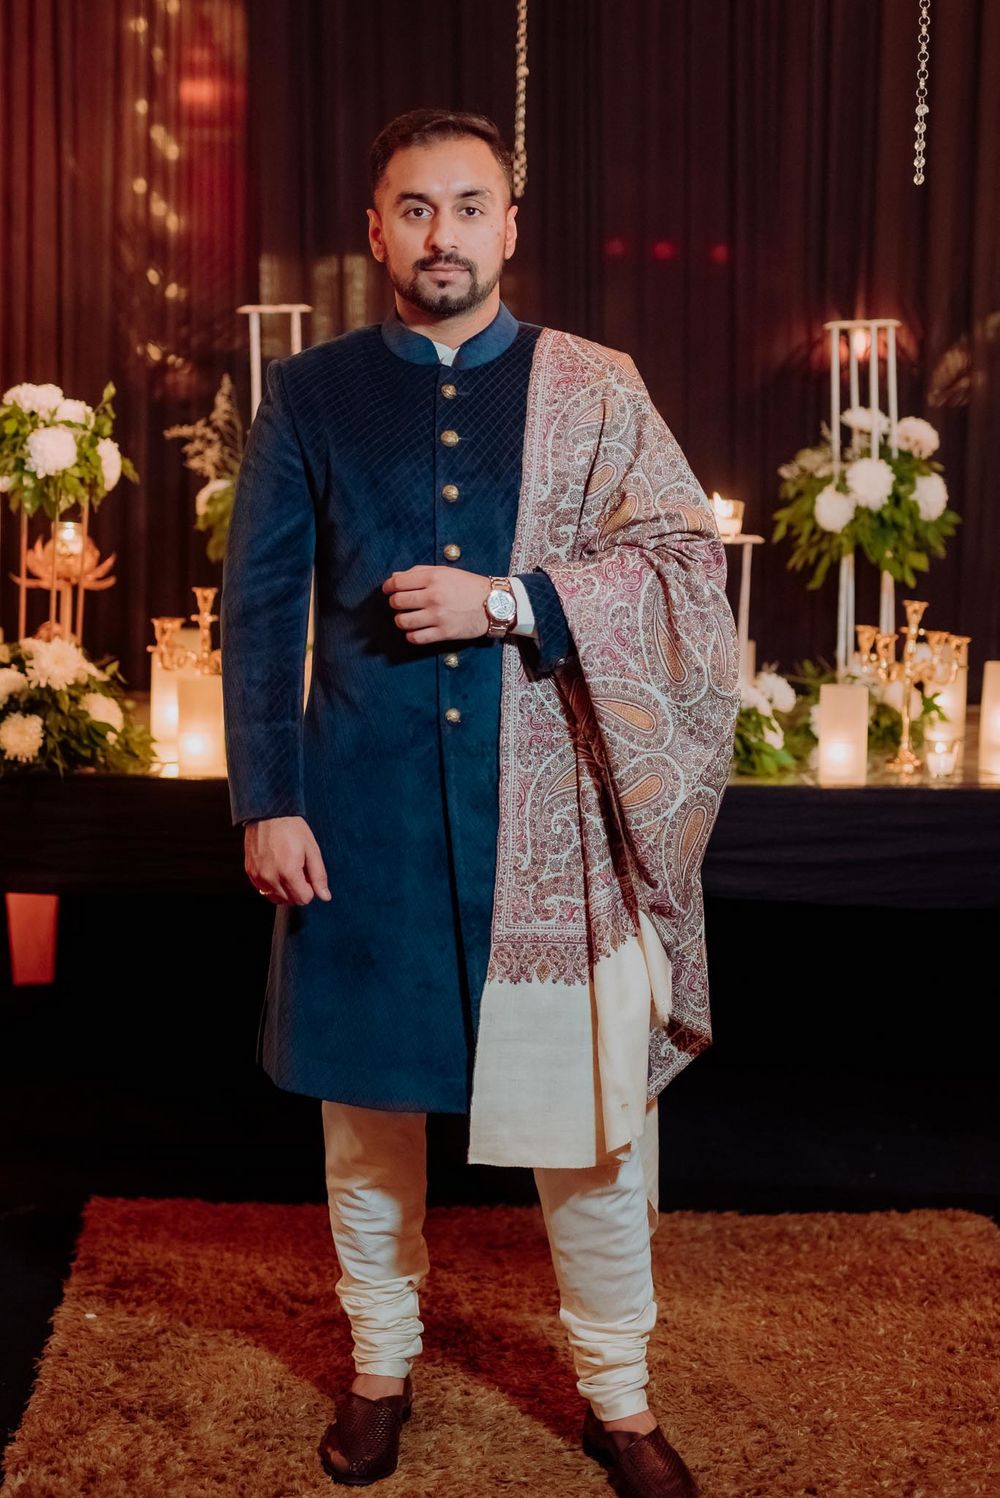 Photo of Groom wearing a velvet bandhgala with paisley motif shawl.